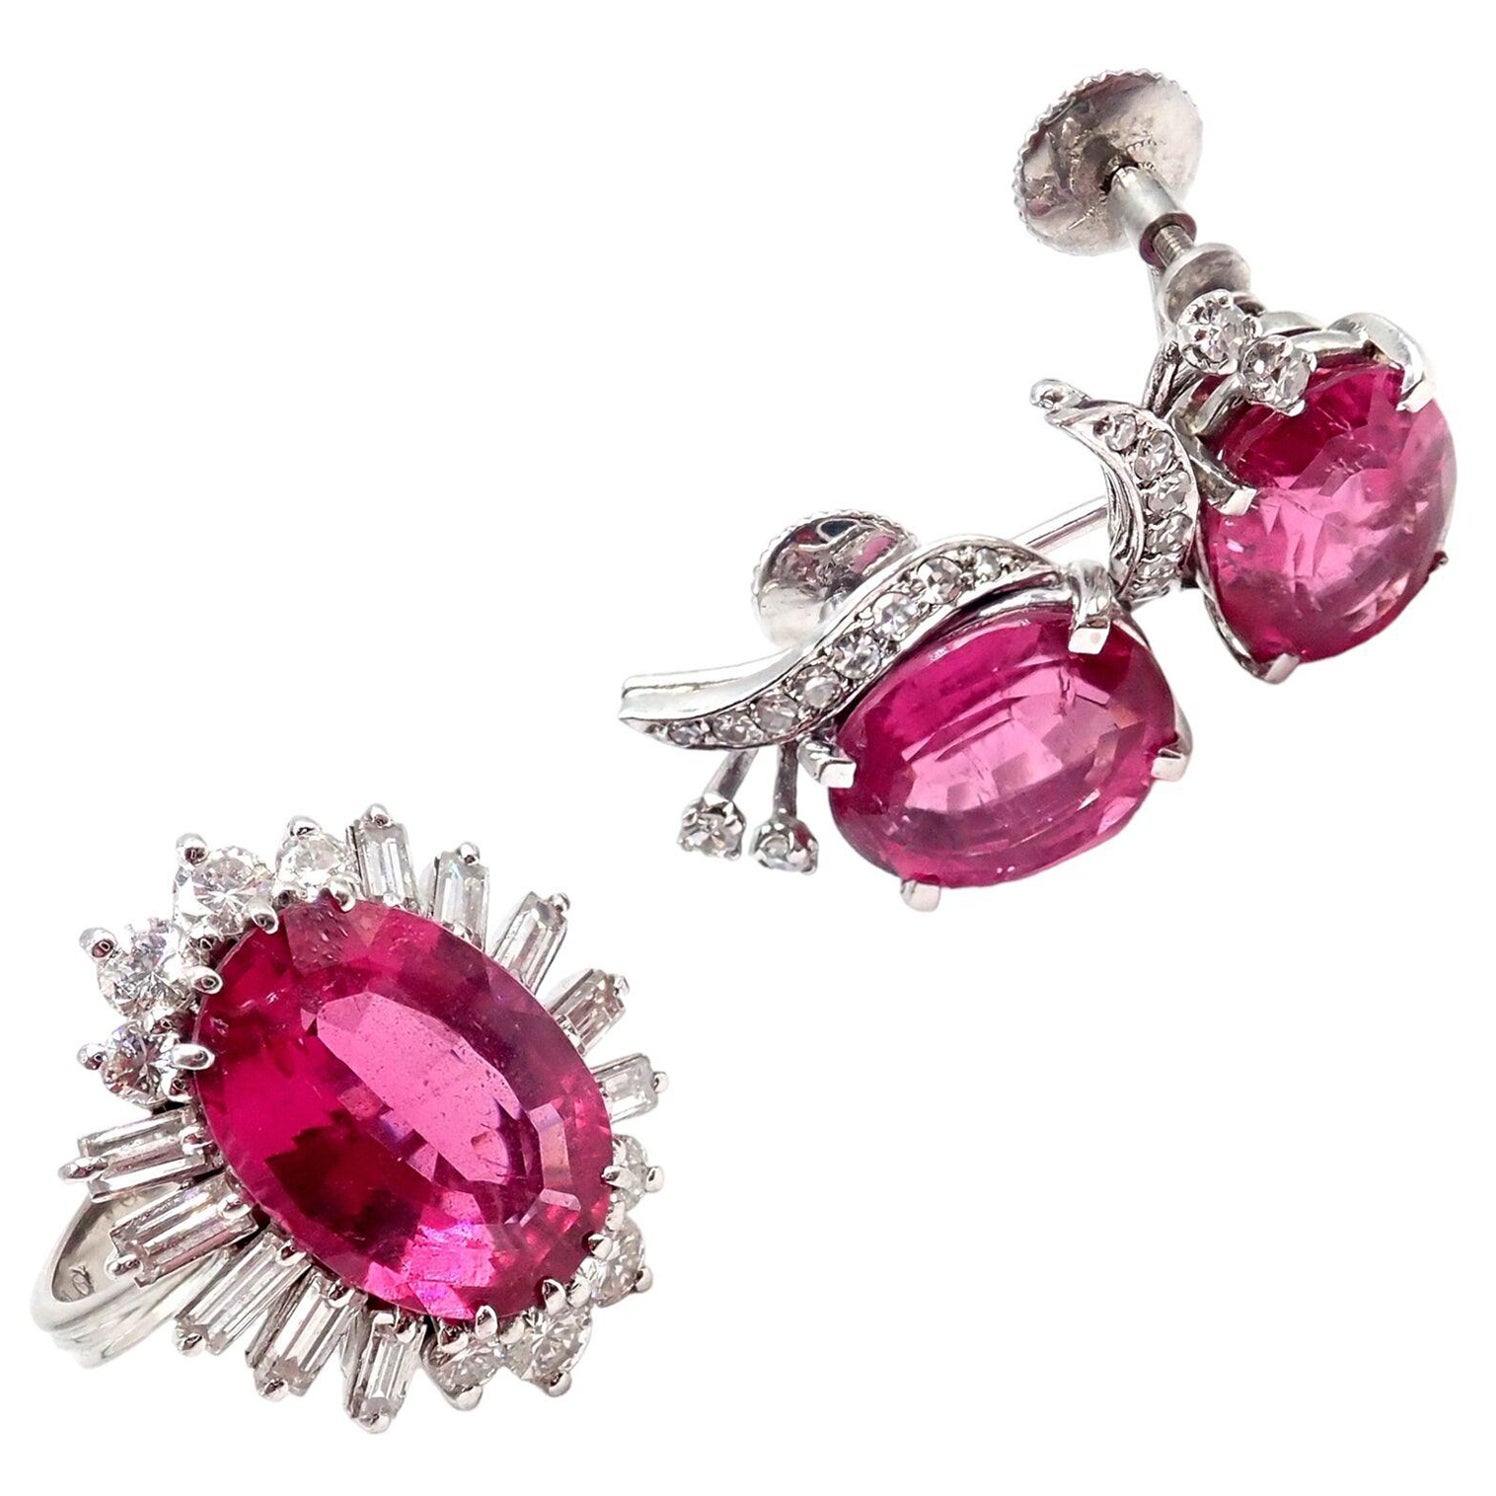 H. Stern Diamond Pink Tourmaline White Gold Ring And Earrings Set For Sale